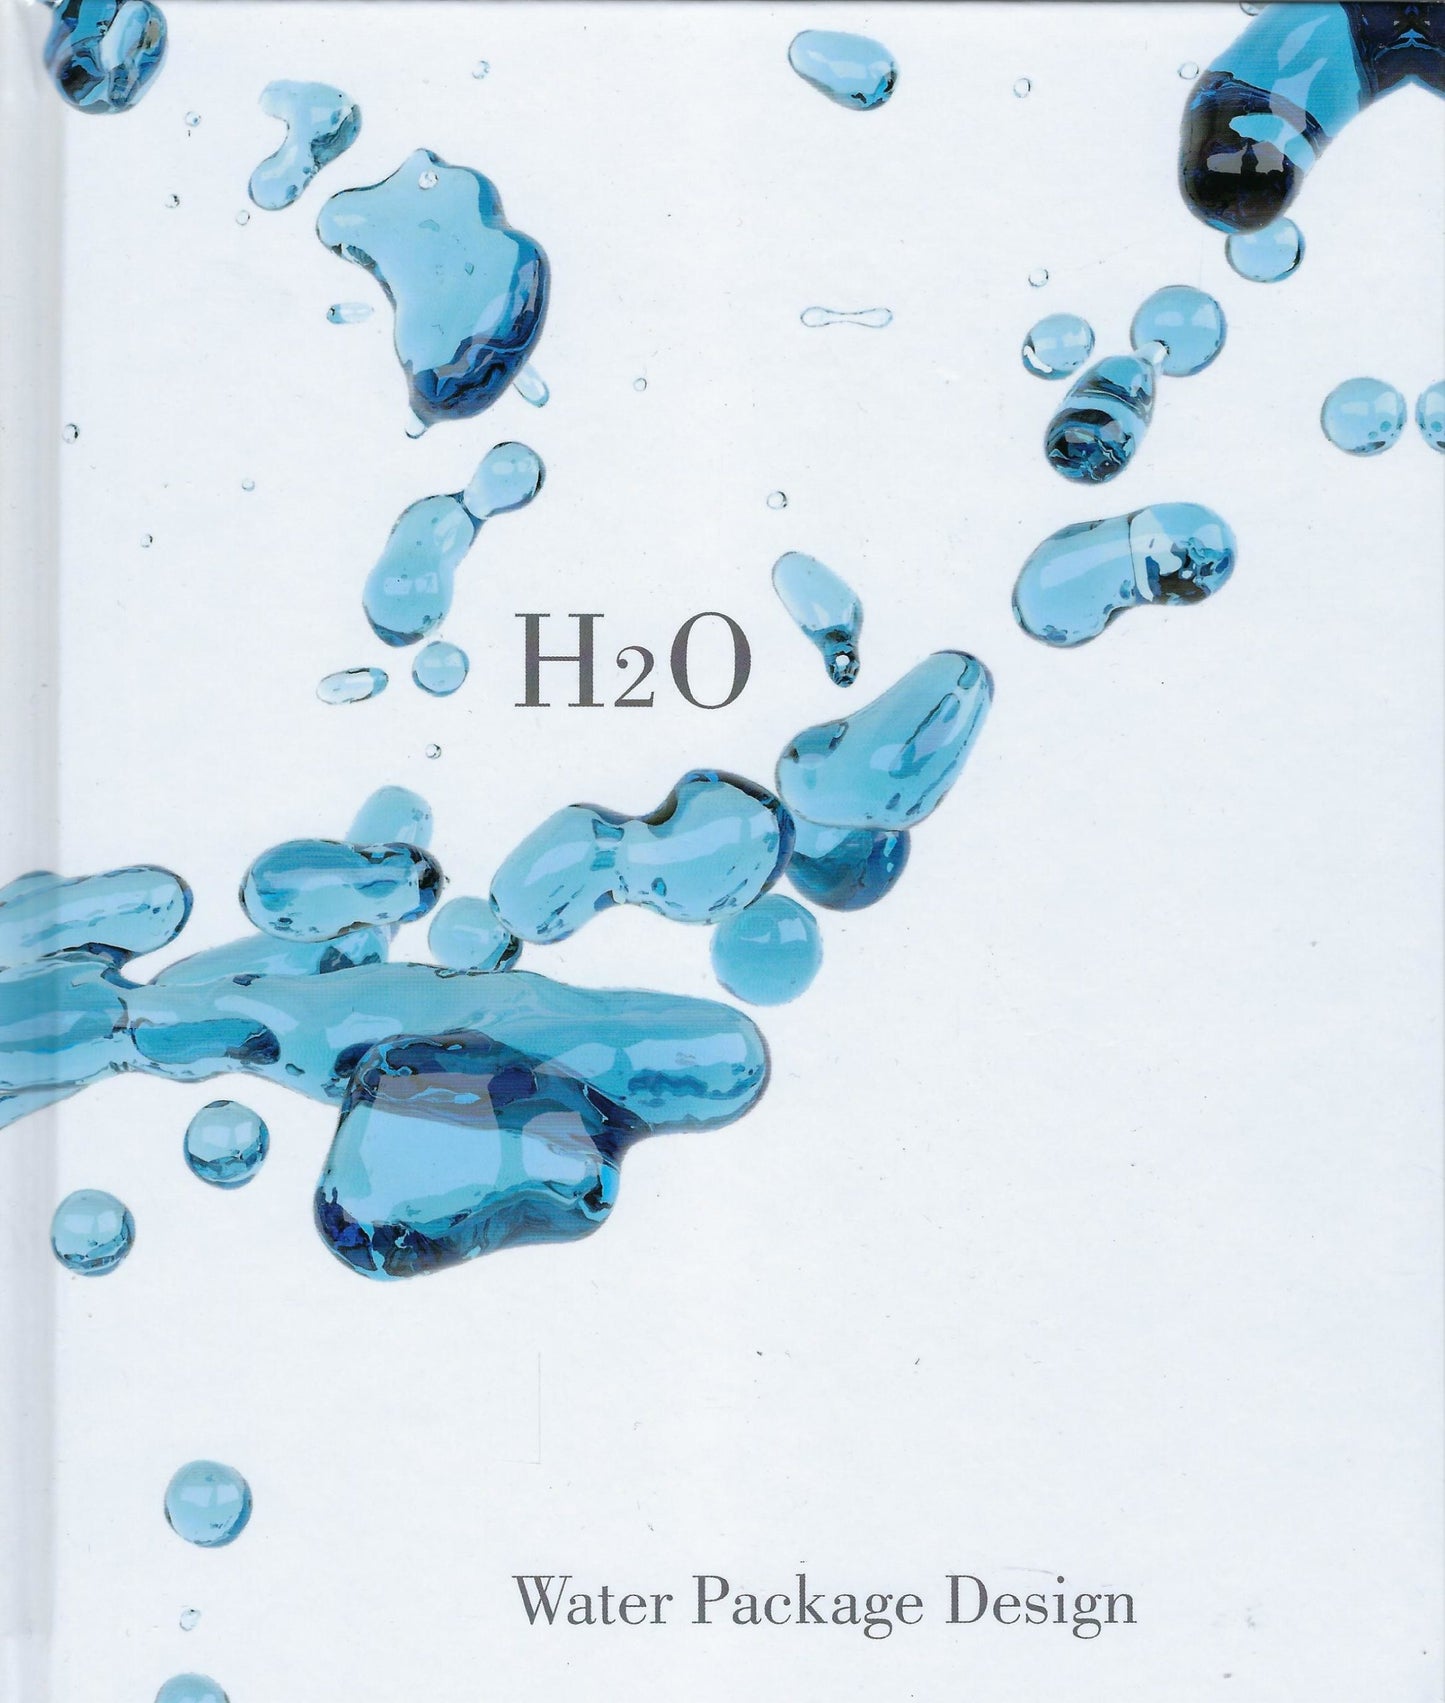 H2O / Water Package Design